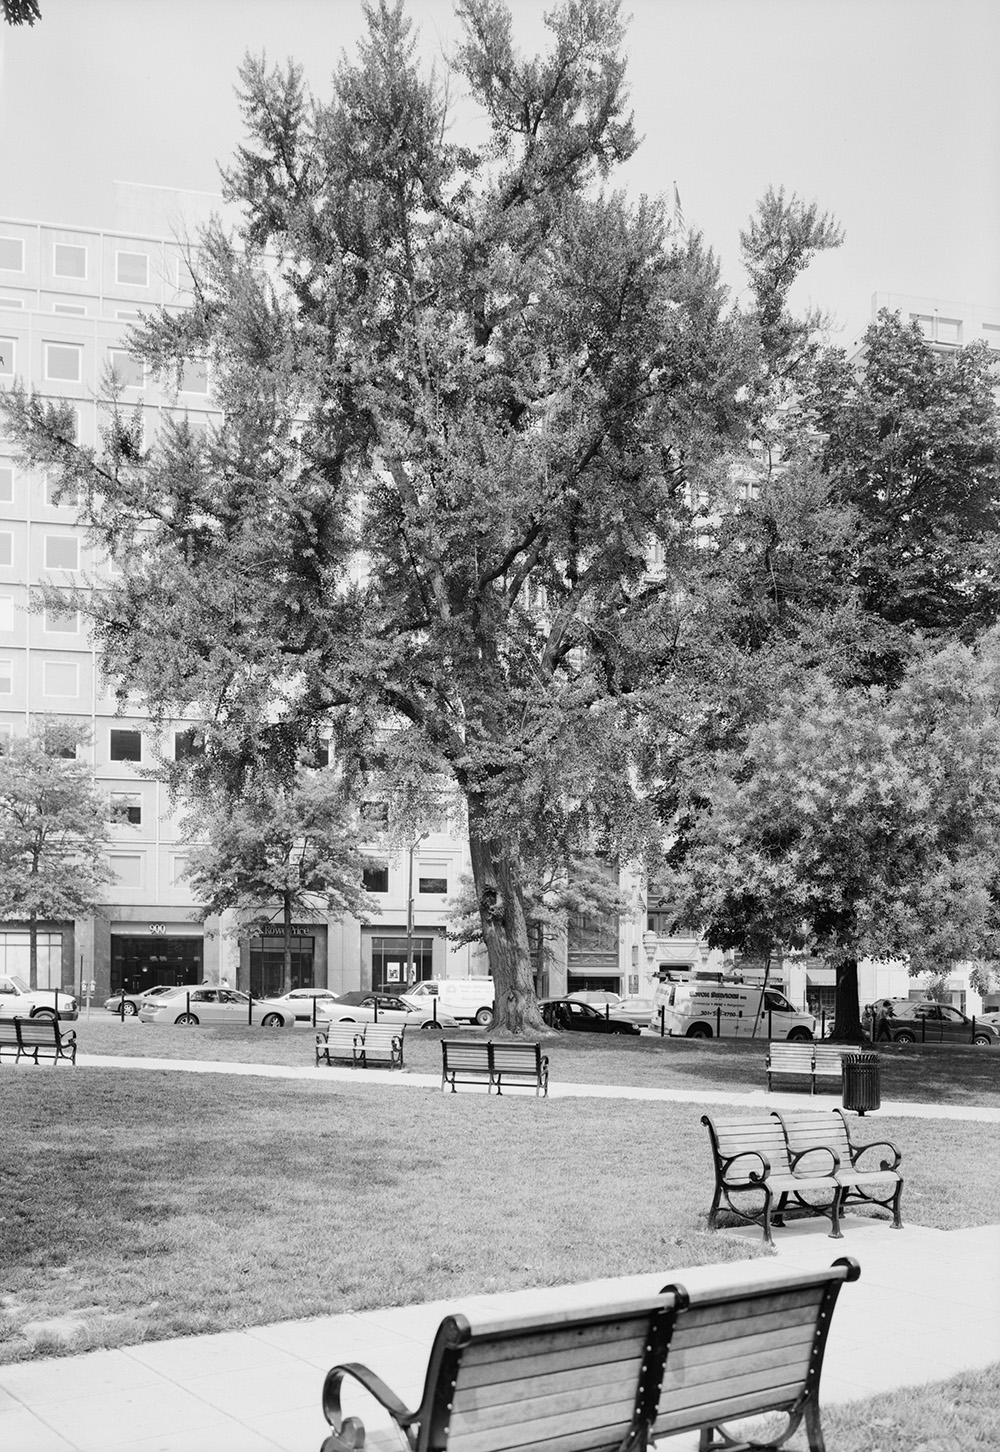 B&w photograph of a city park with ginkgo trees and benches.